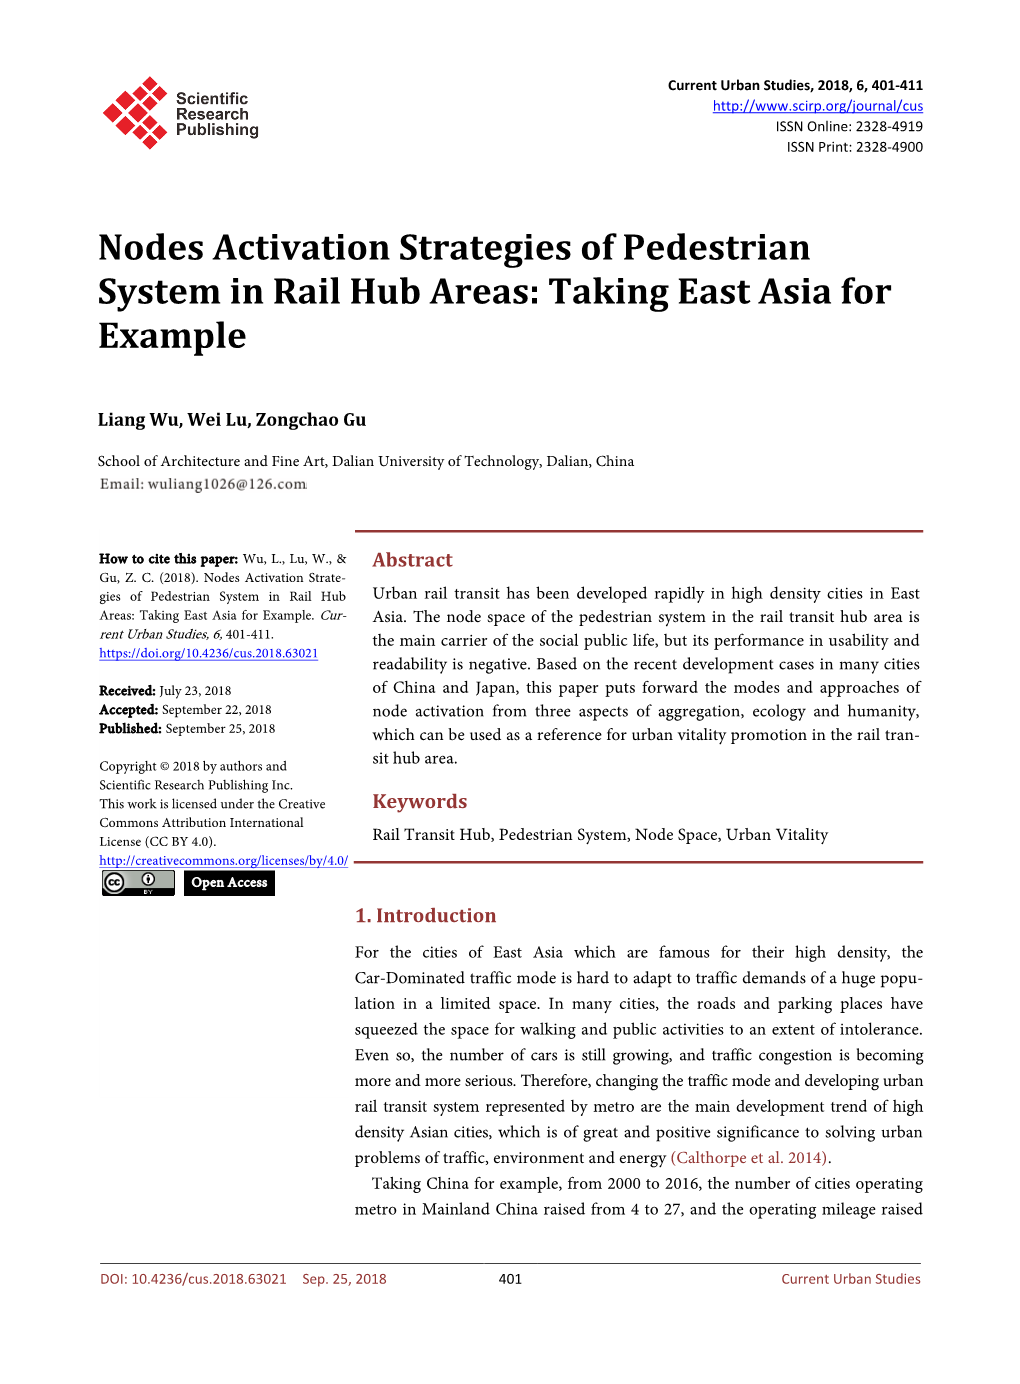 Nodes Activation Strategies of Pedestrian System in Rail Hub Areas: Taking East Asia for Example